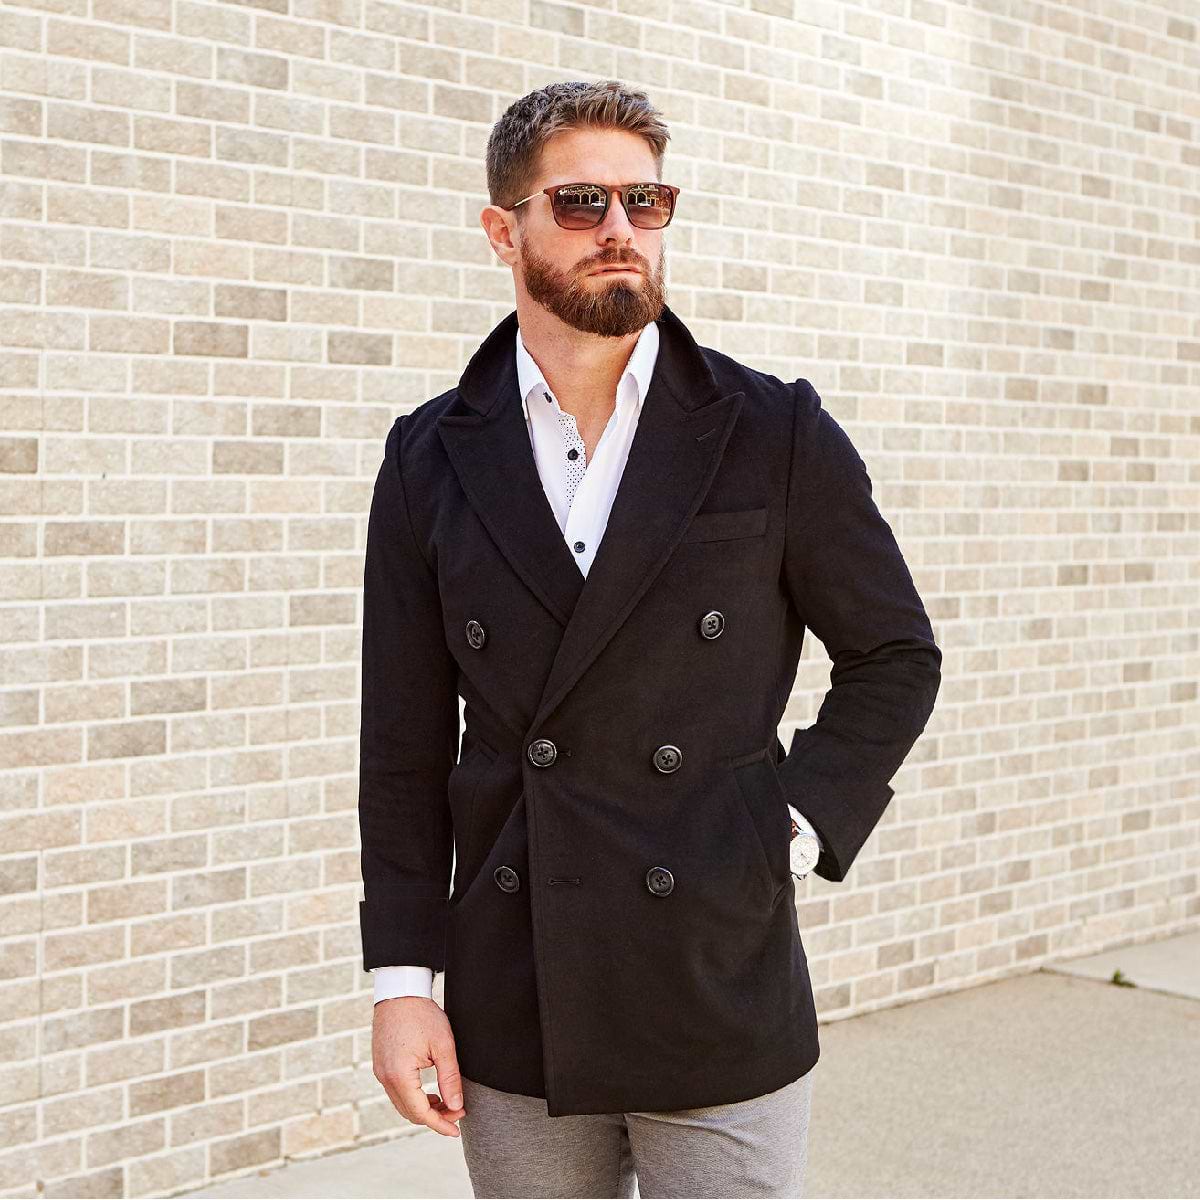 Solid Black Double-Breasted Overcoat